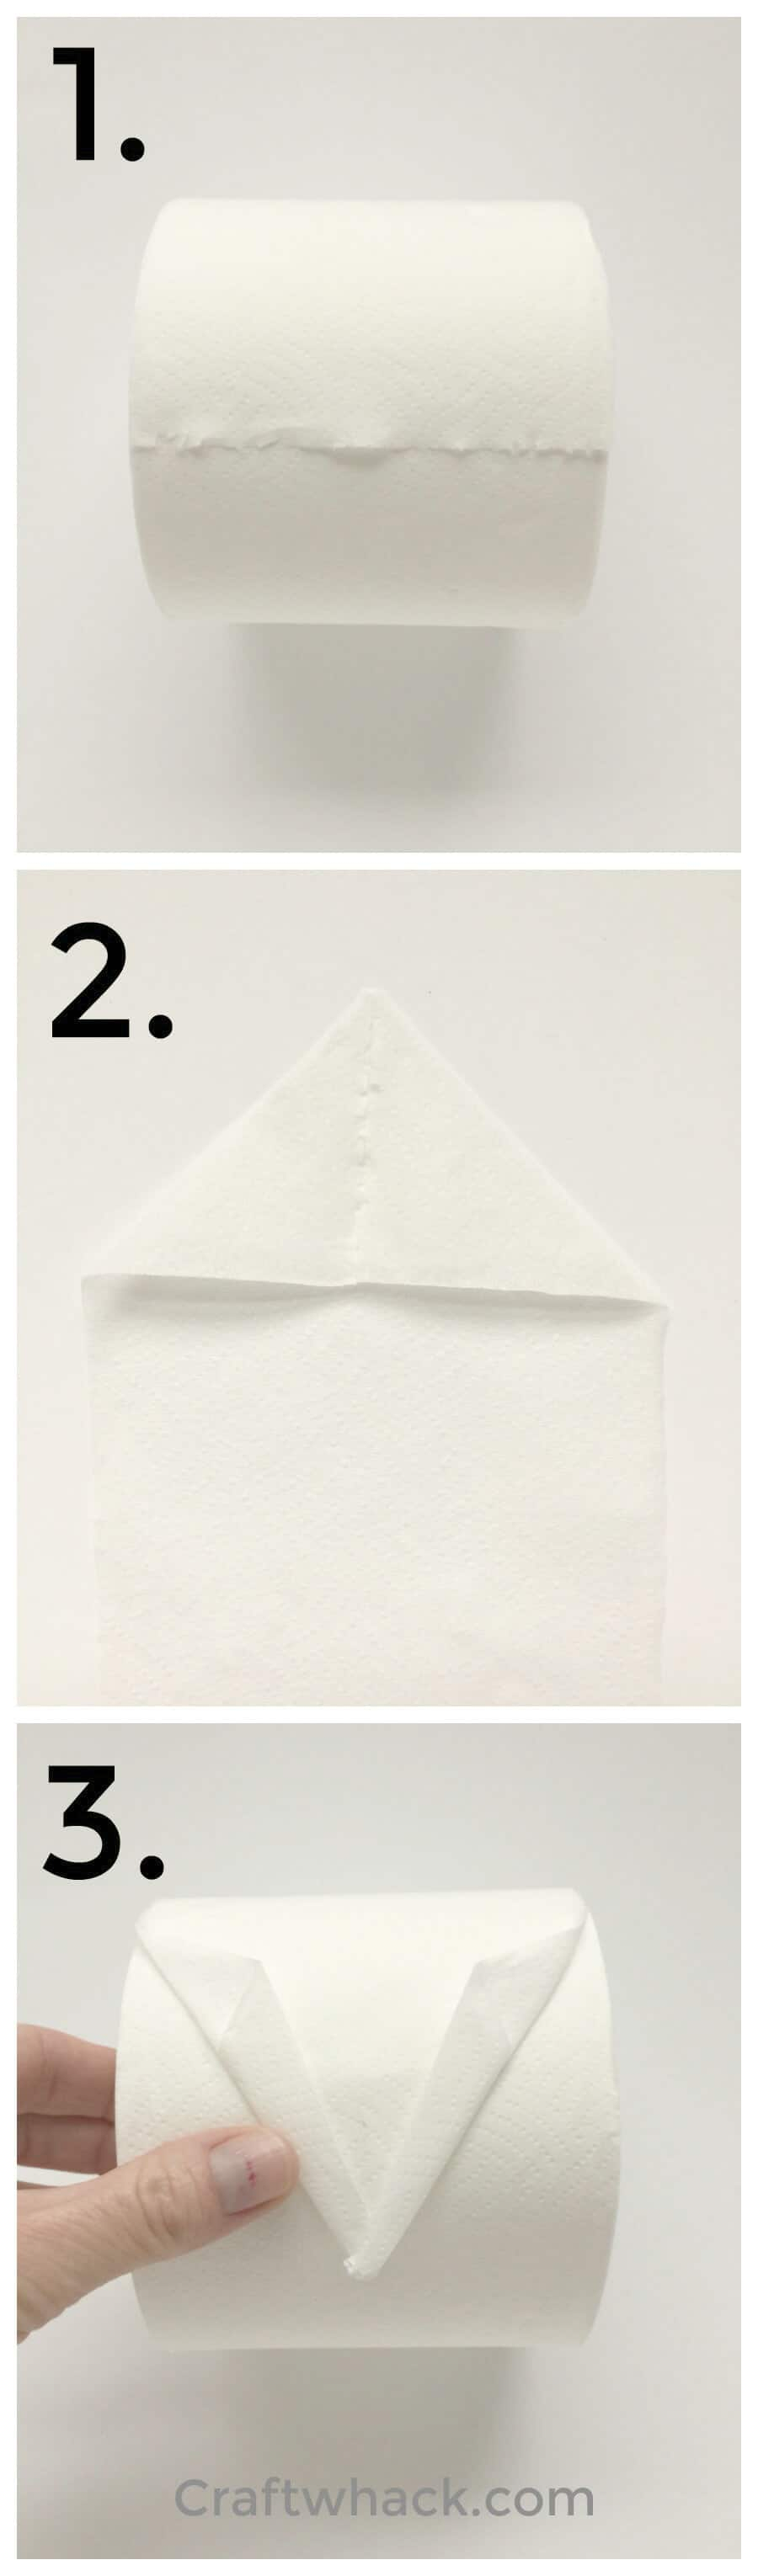 Origami Toilet Paper Ahoy Learn To Fold A Toilet Paper Origami Sailboat Craftwhack